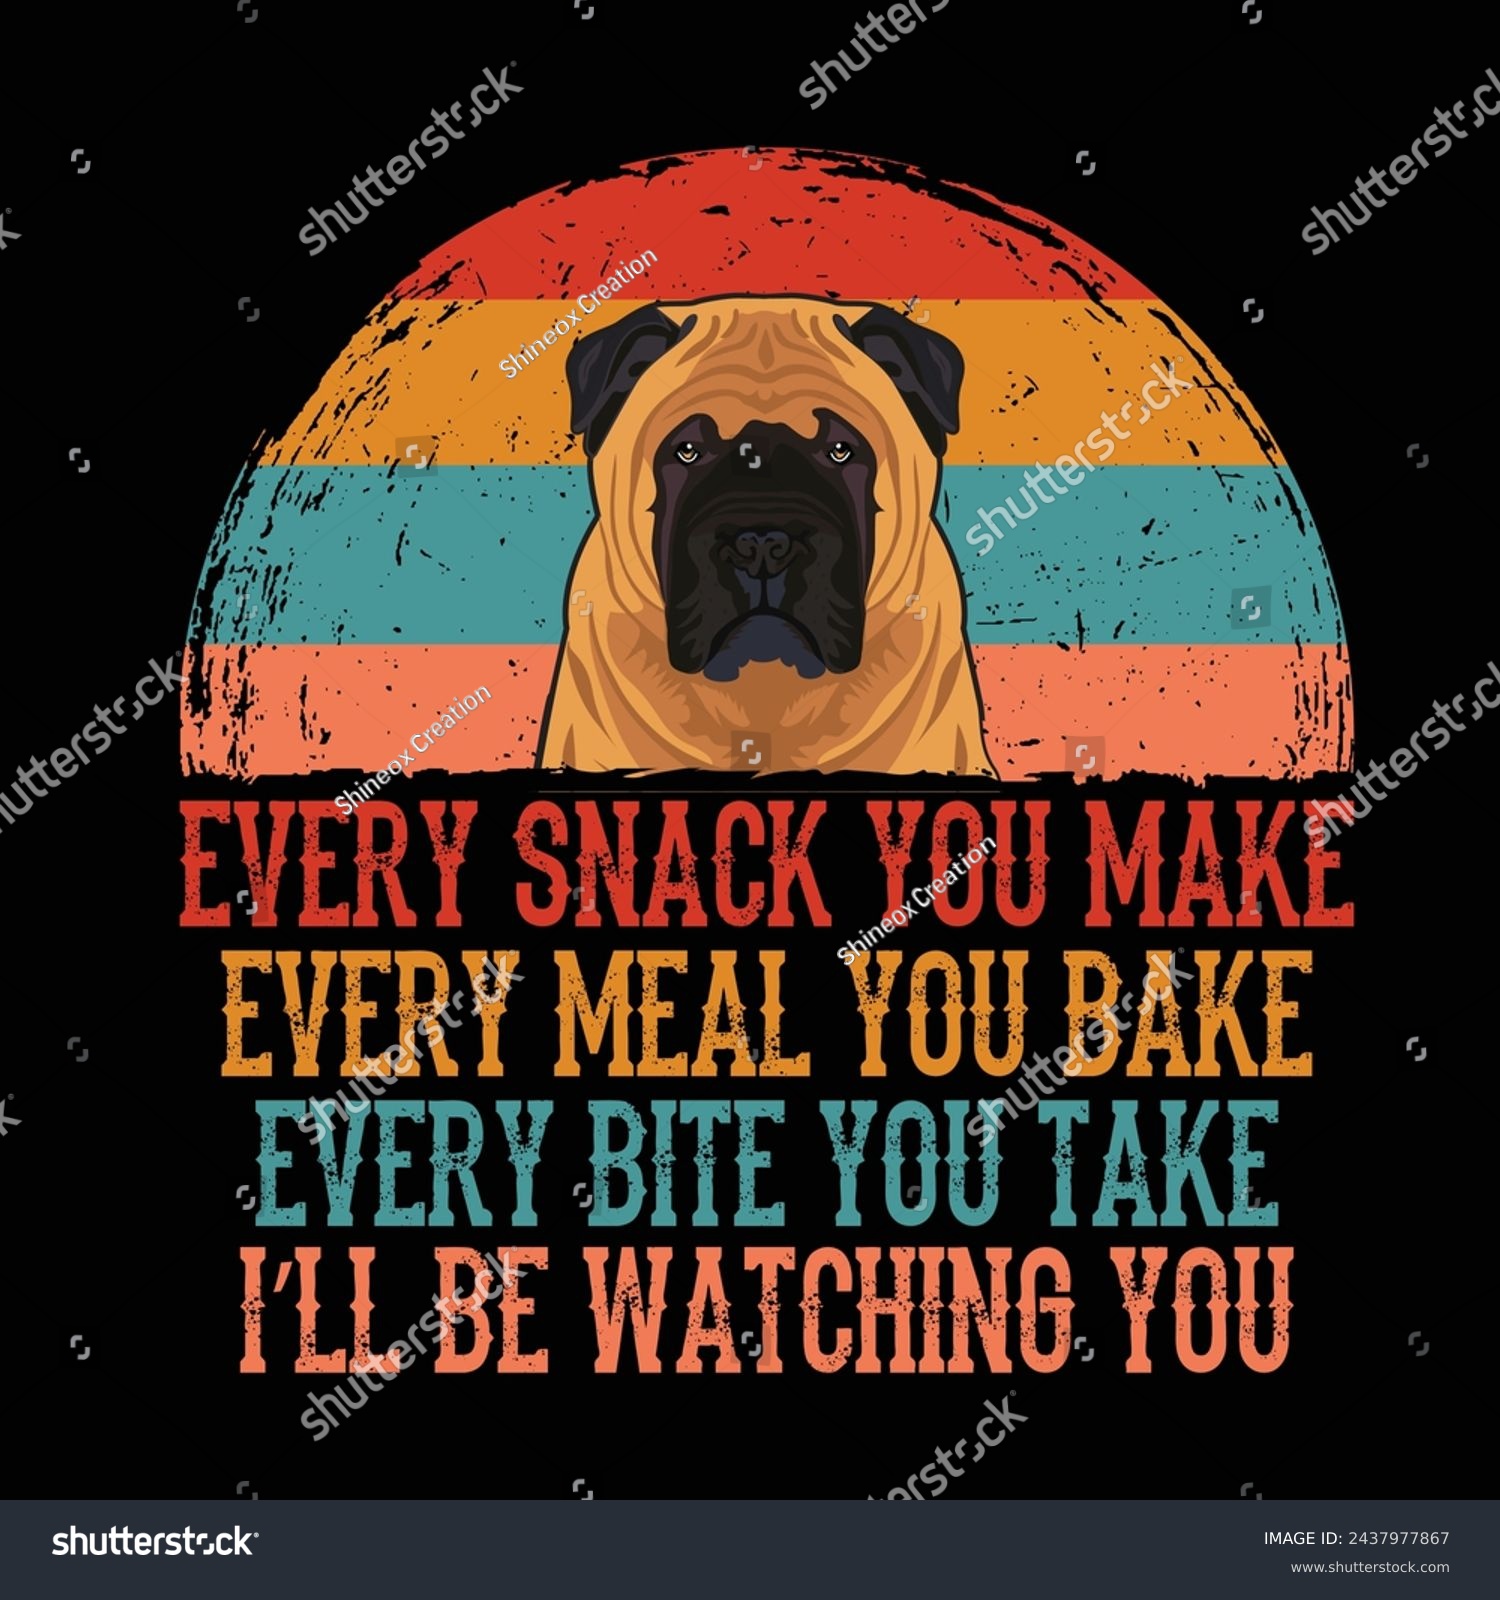 SVG of Every snack you make Every meal you bake Every bite you take I'll Be Watching You Bullmastiff Dog Typography t-shirt Design Vector svg